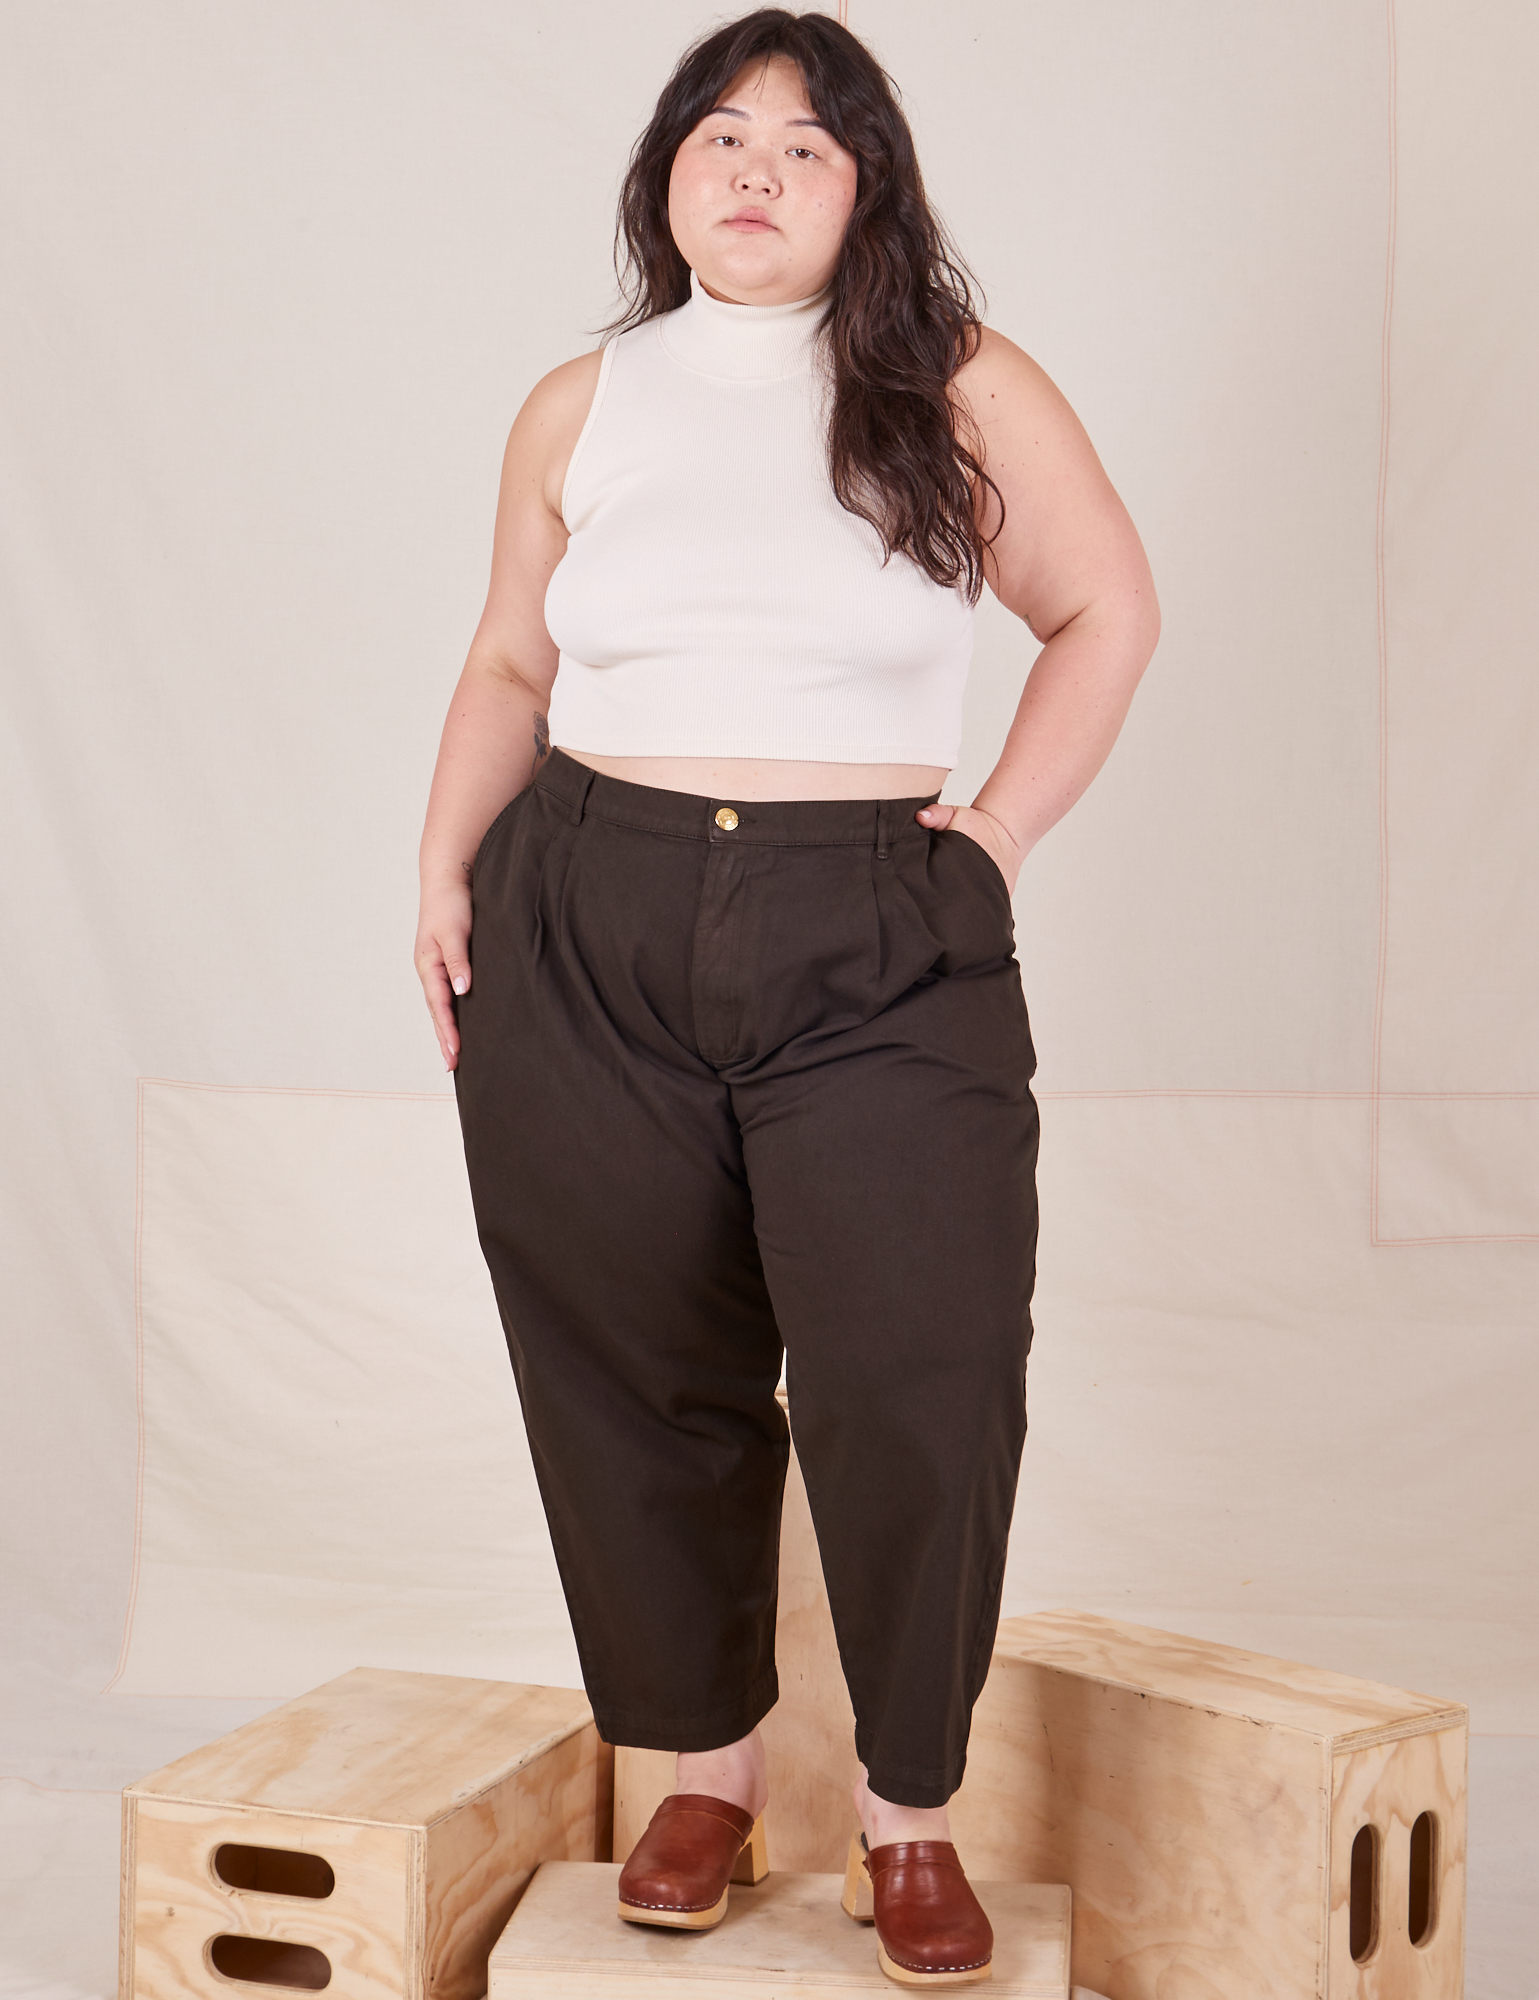 Ashley is 5'7" and wearing 1XL Petite Heavyweight Trousers in Espresso Brown paired with Sleeveless Turtleneck in vintage tee off-white